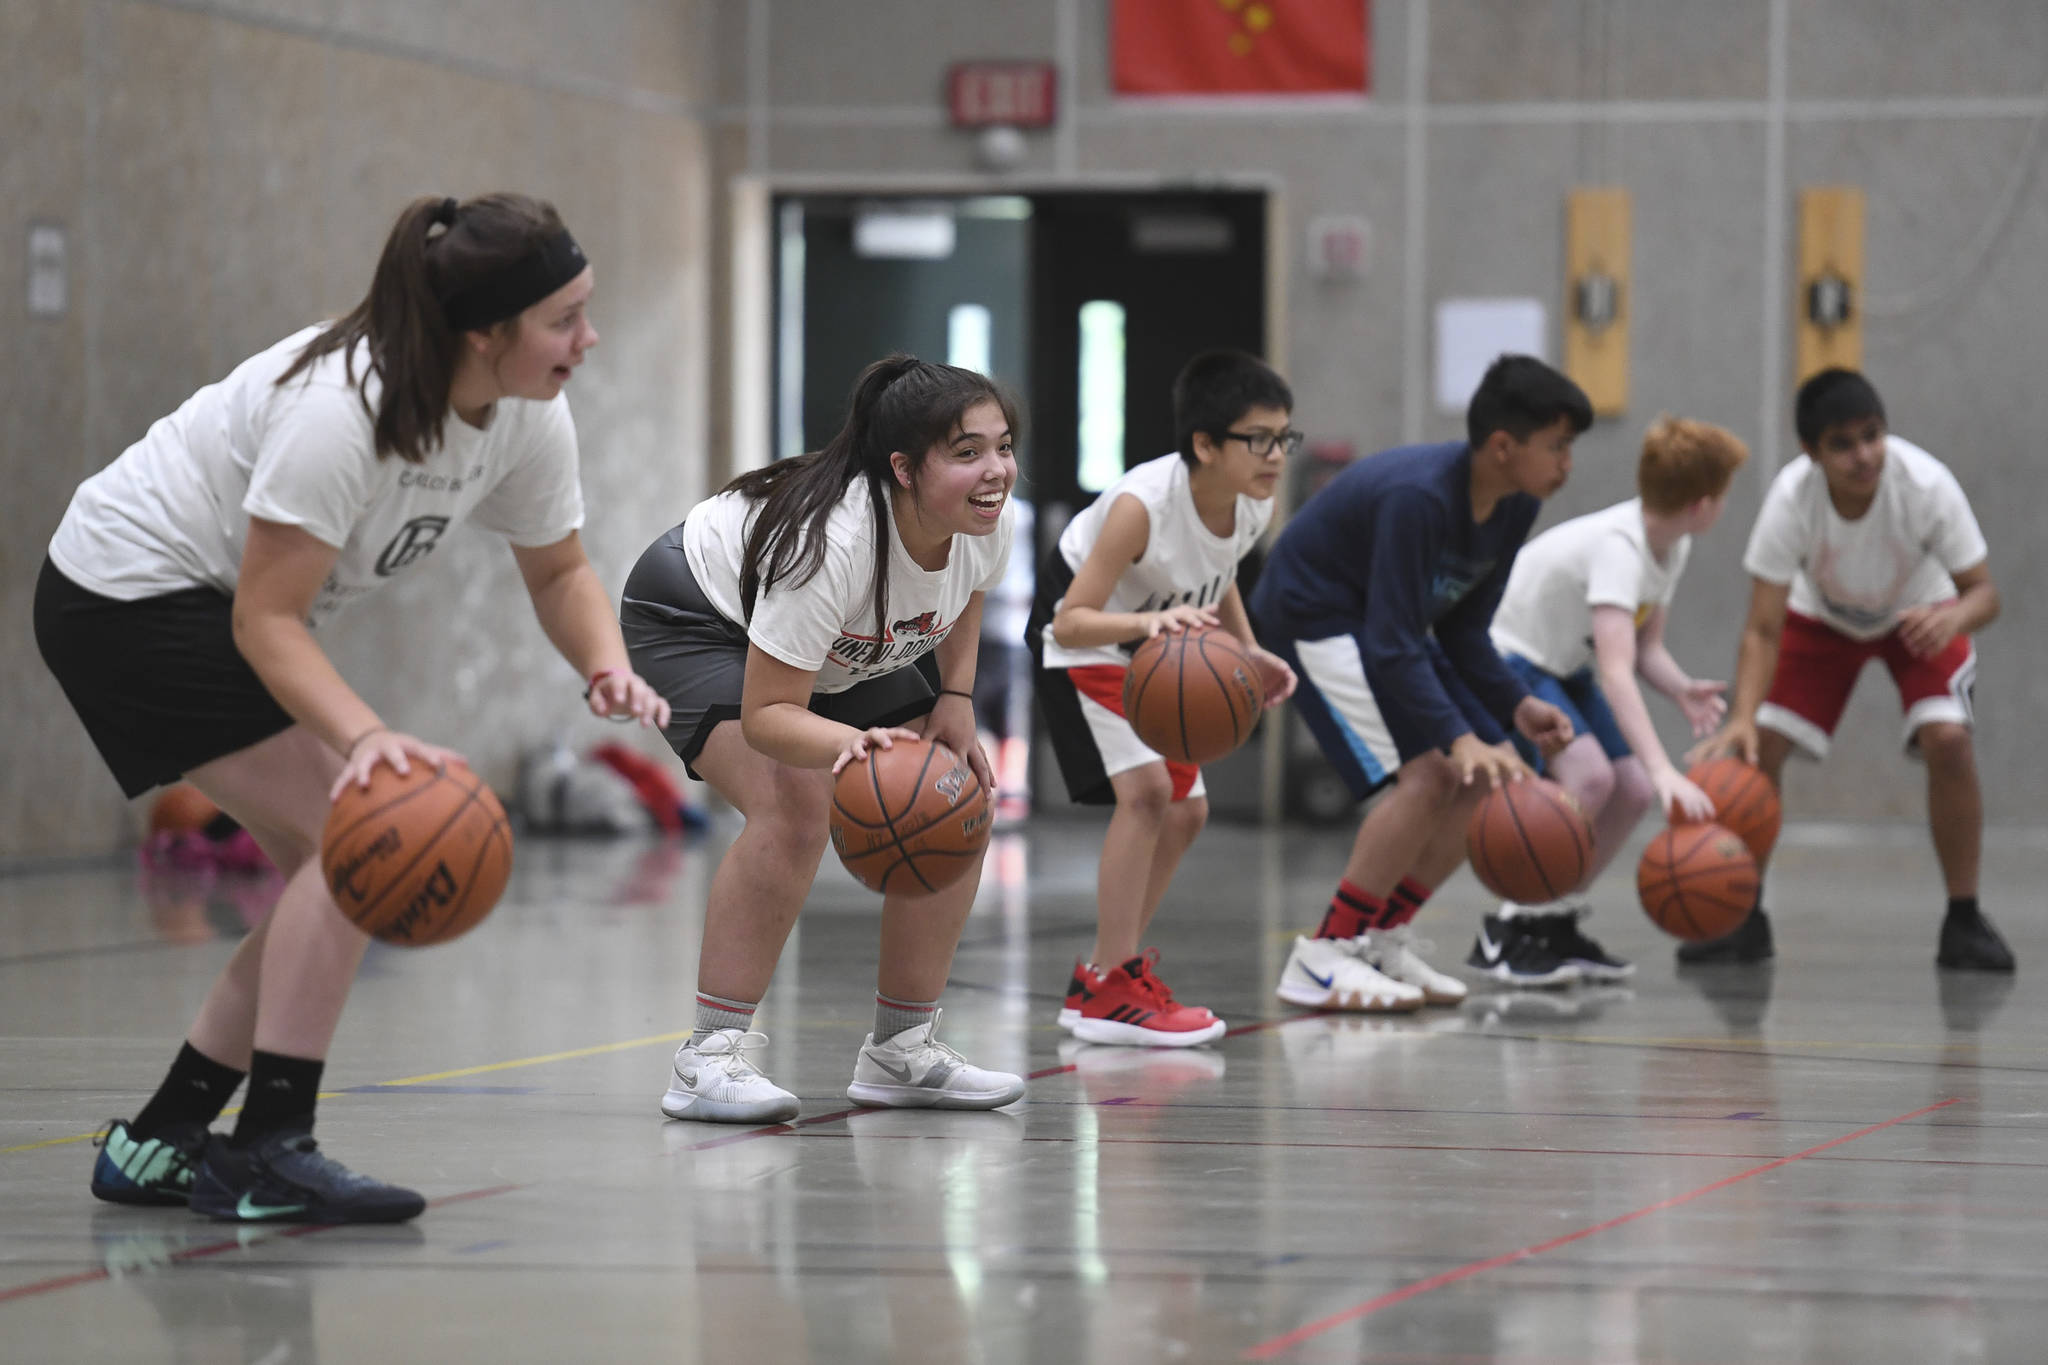 Students practice dribbling during the Latseen Hoop Camp at Dzantak’i Heeni Middle School on Monday, July 29, 2019. The camp runs all week for students entering grades 6-12. (Michael Penn | Juneau Empire)